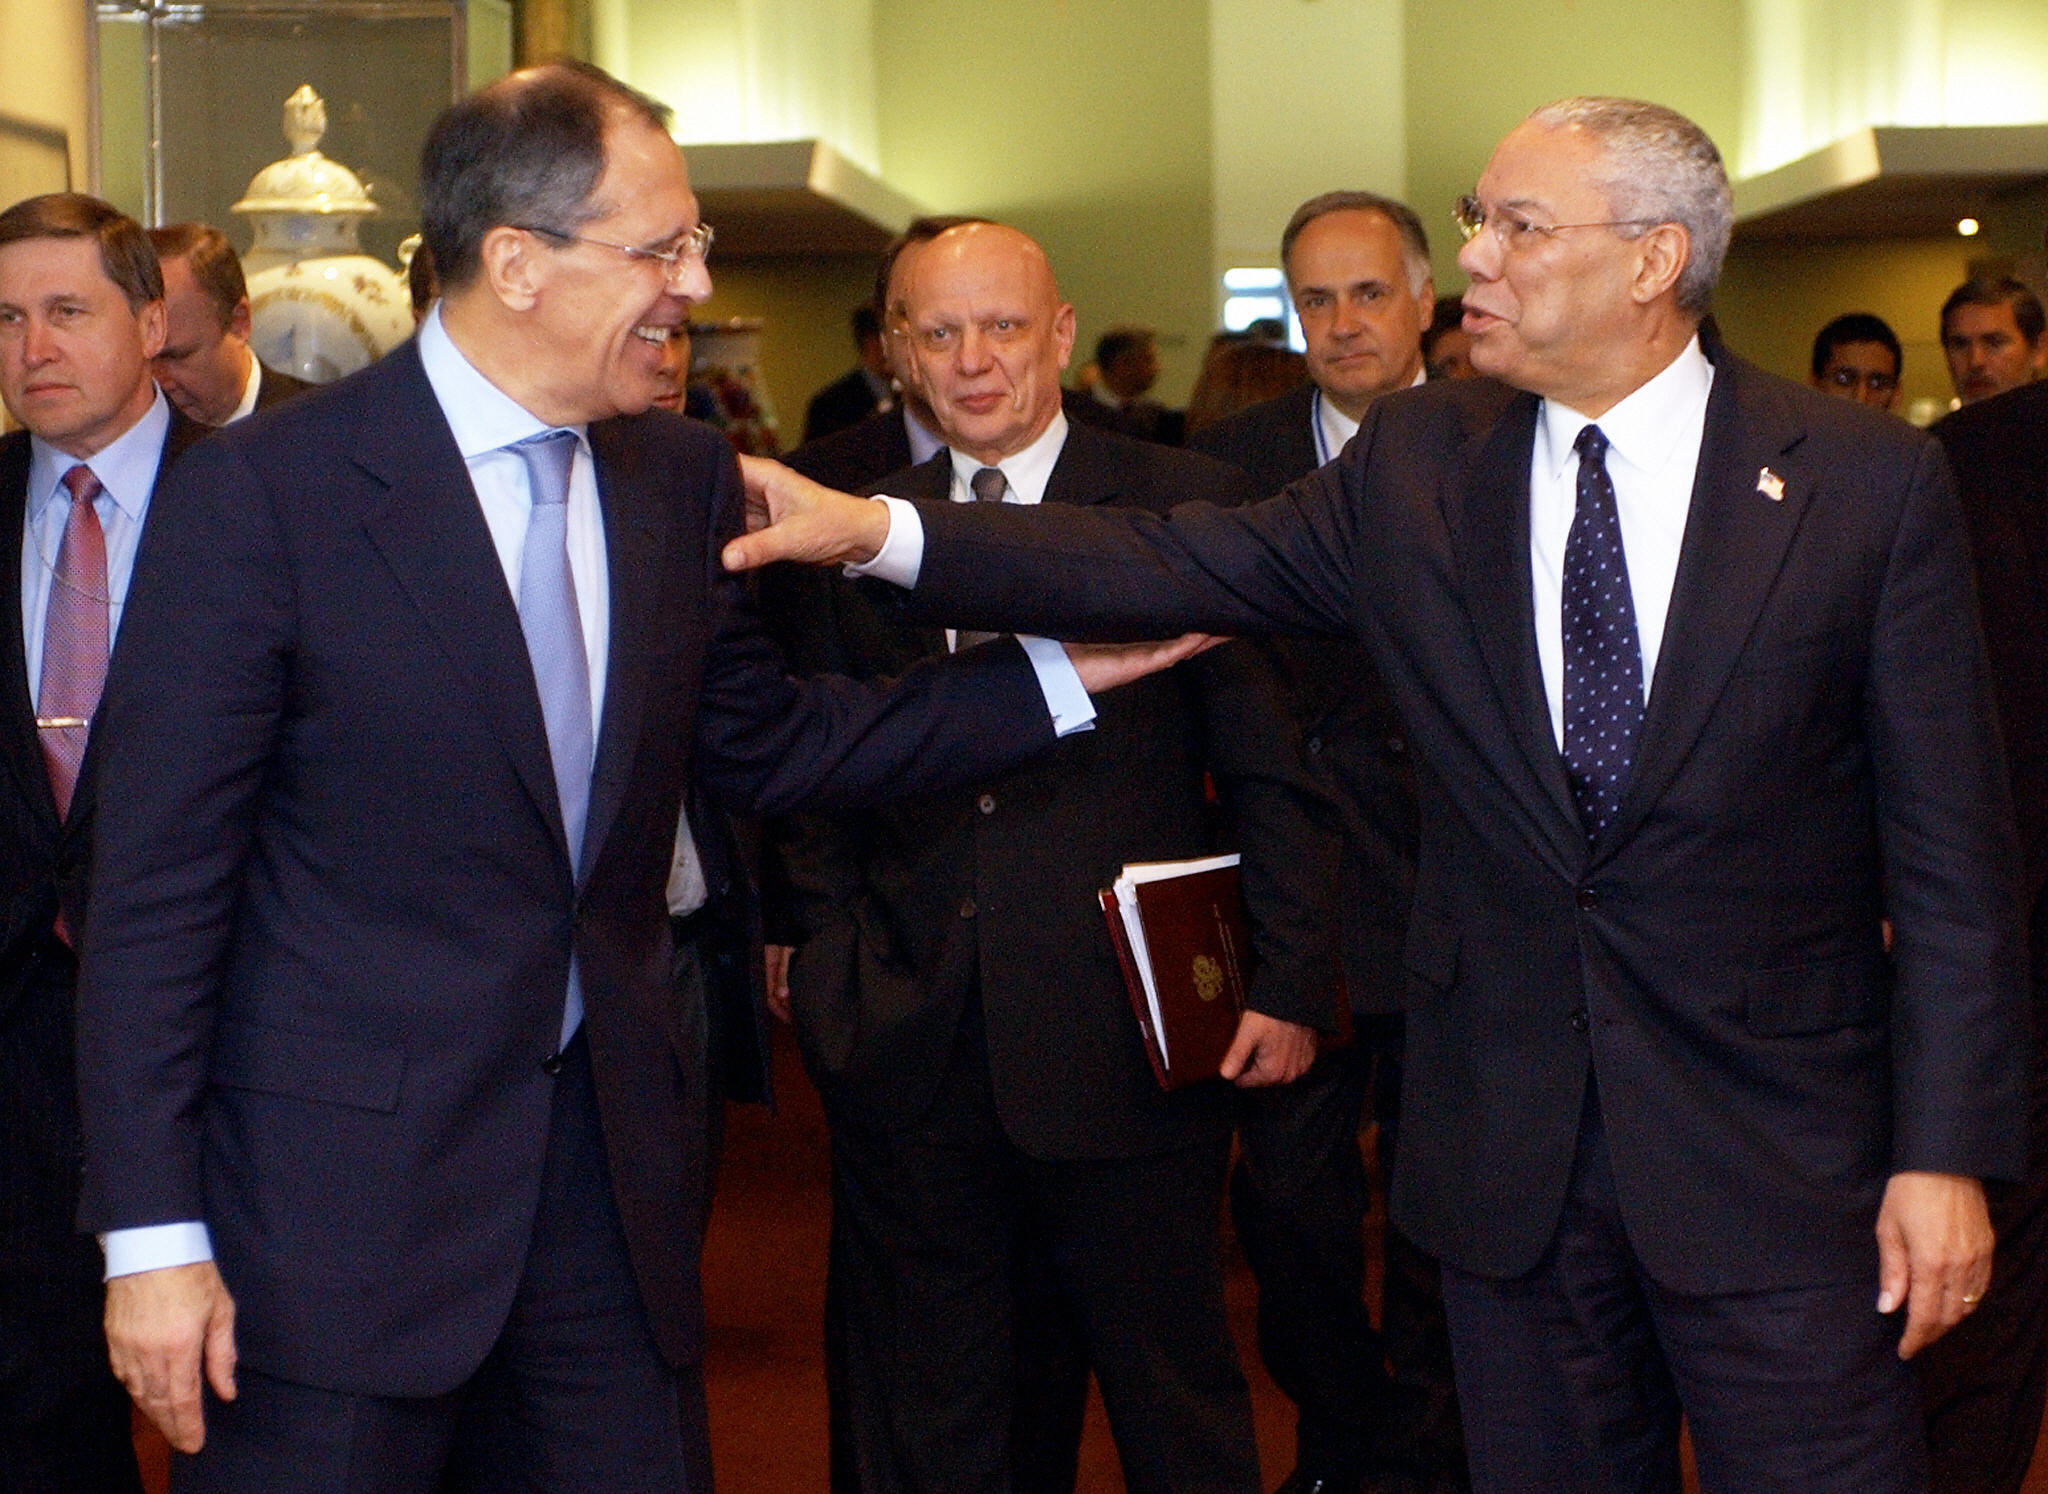 Russian Foreign Minister Sergey Lavrov shakes hands with US Secretary of State Colin Powell in May 2004 after their meeting at United Nations headquarters in New York. 